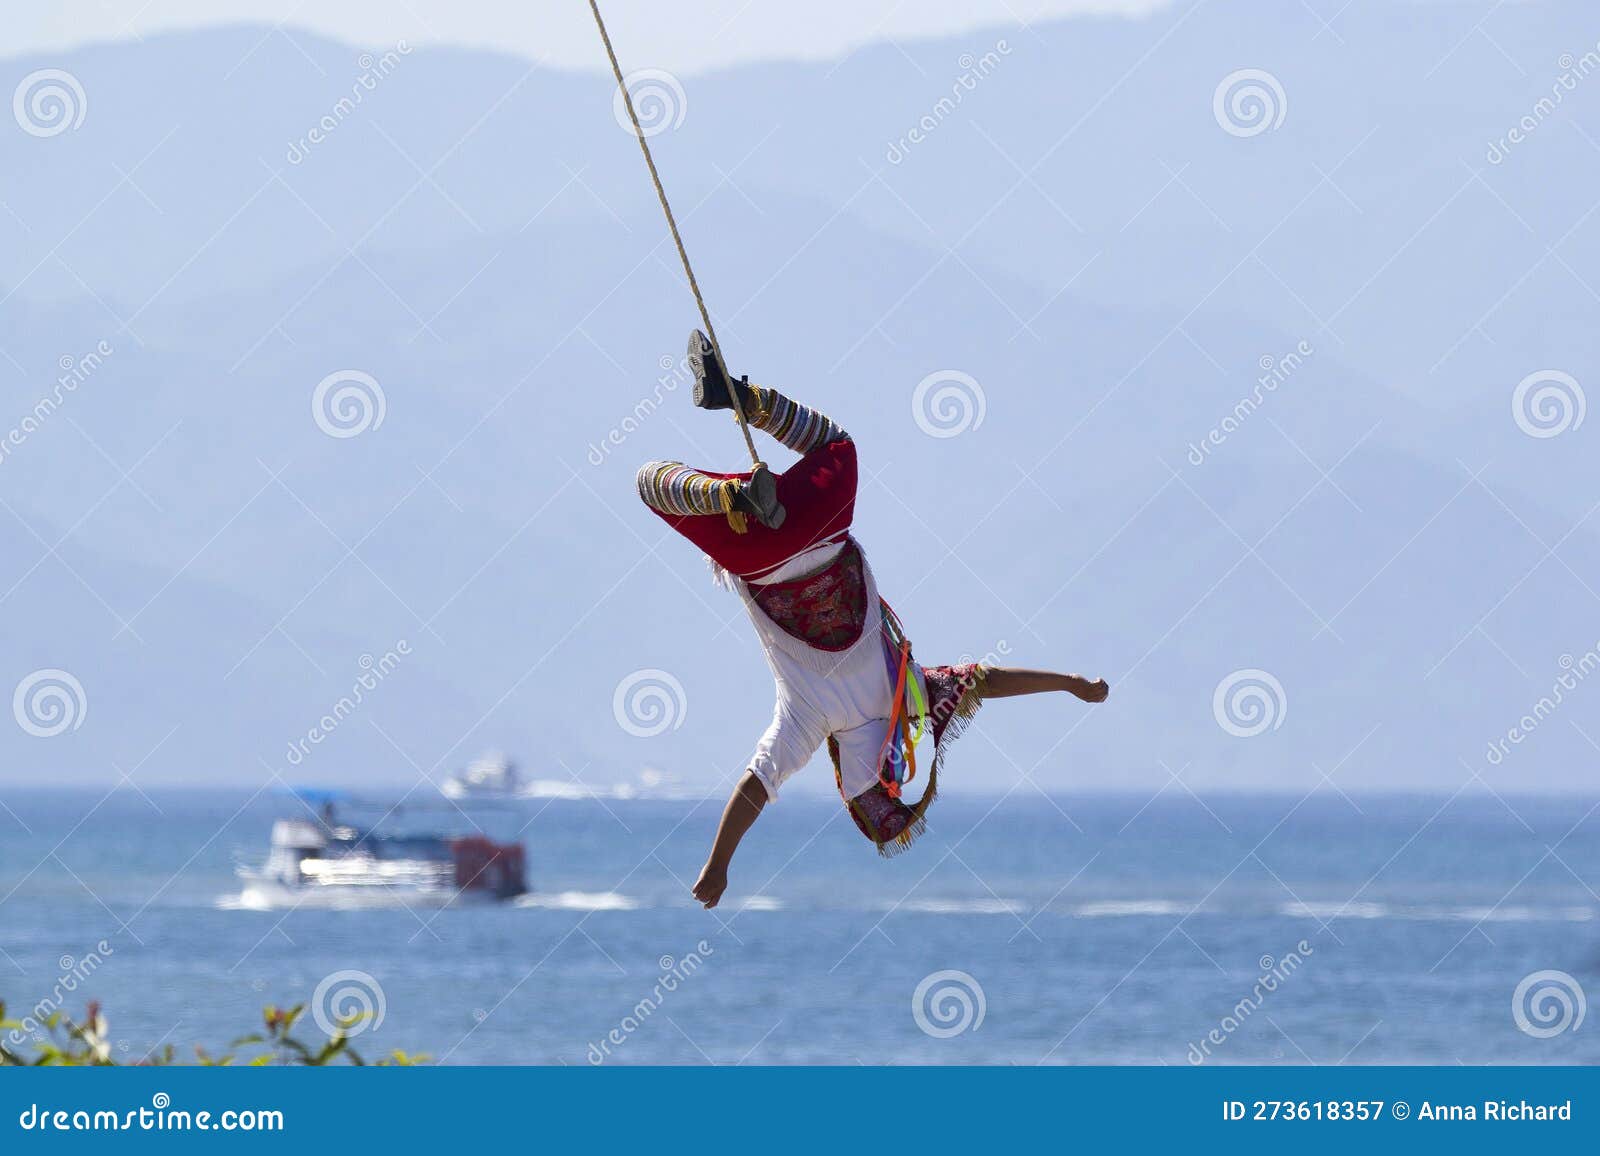 volador is flying on the rope in ancient ritual dance in mexico